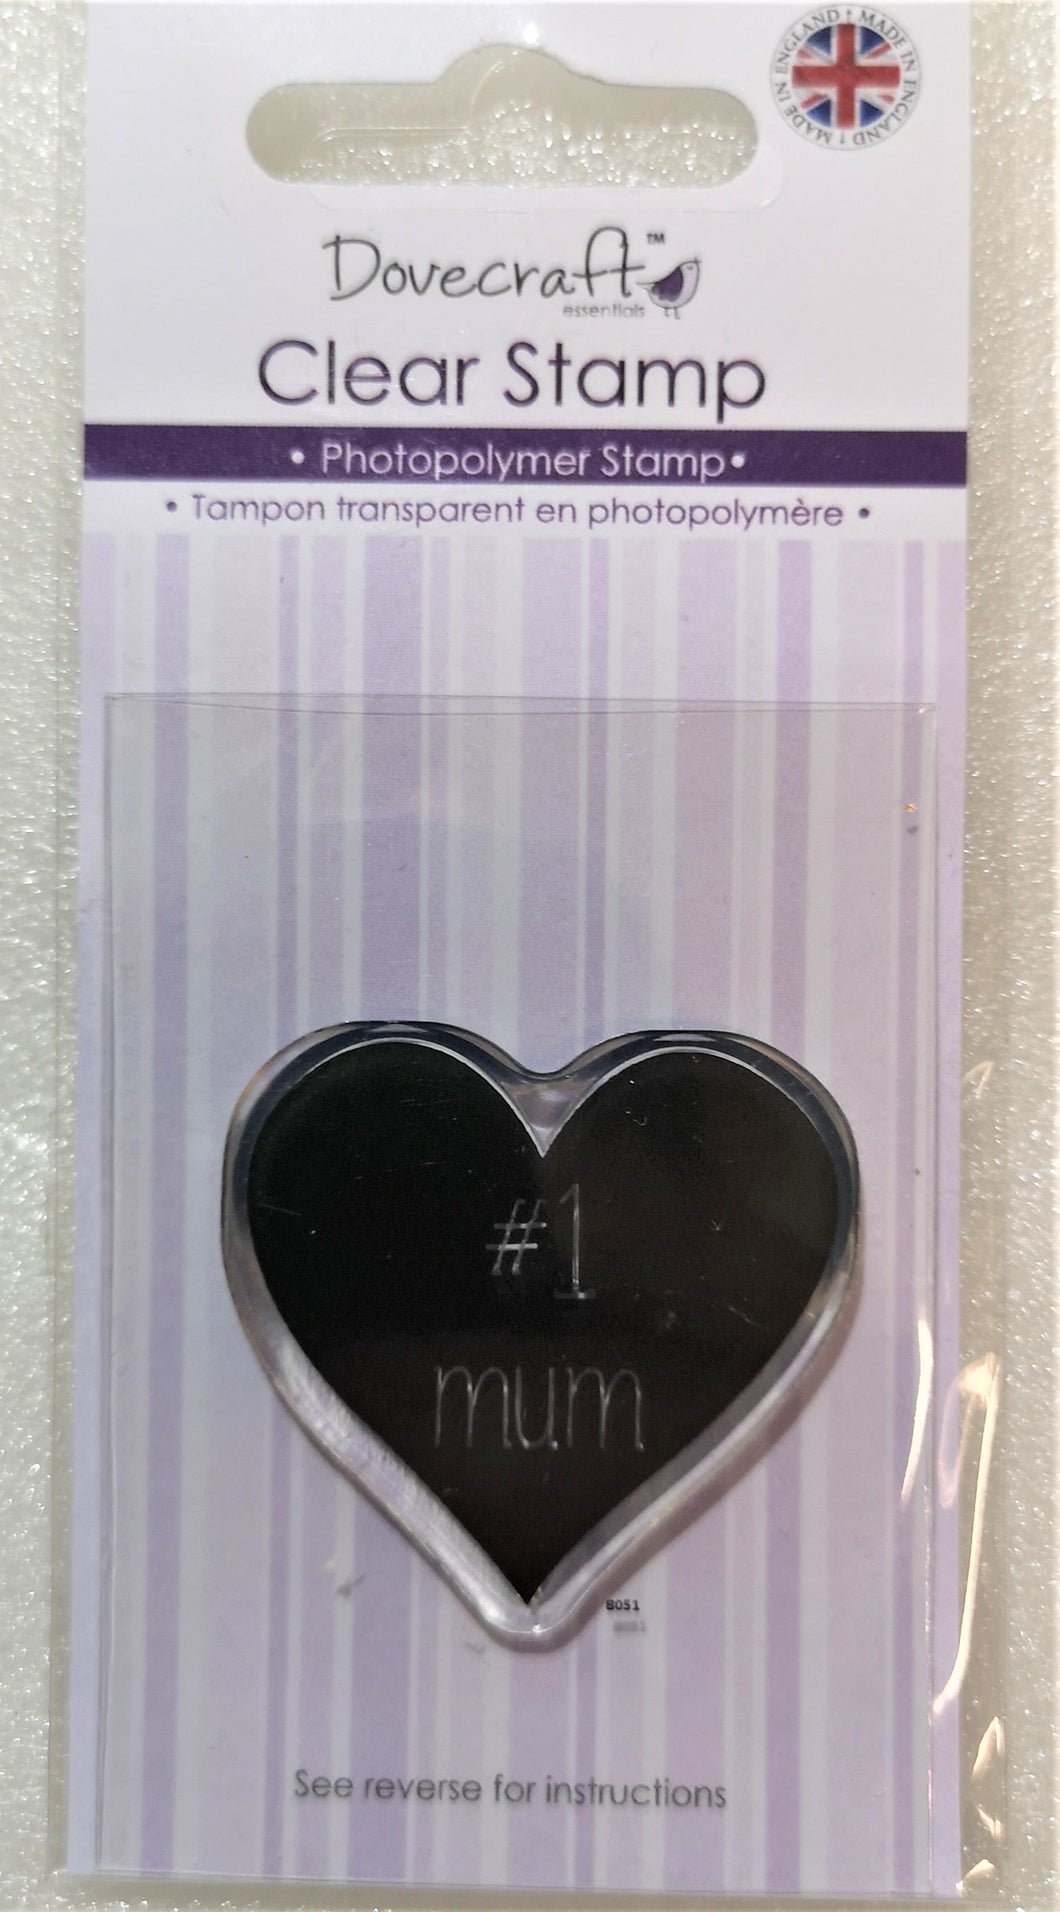 Dovecraft No1 Mum Photopolymer Stamp (small)